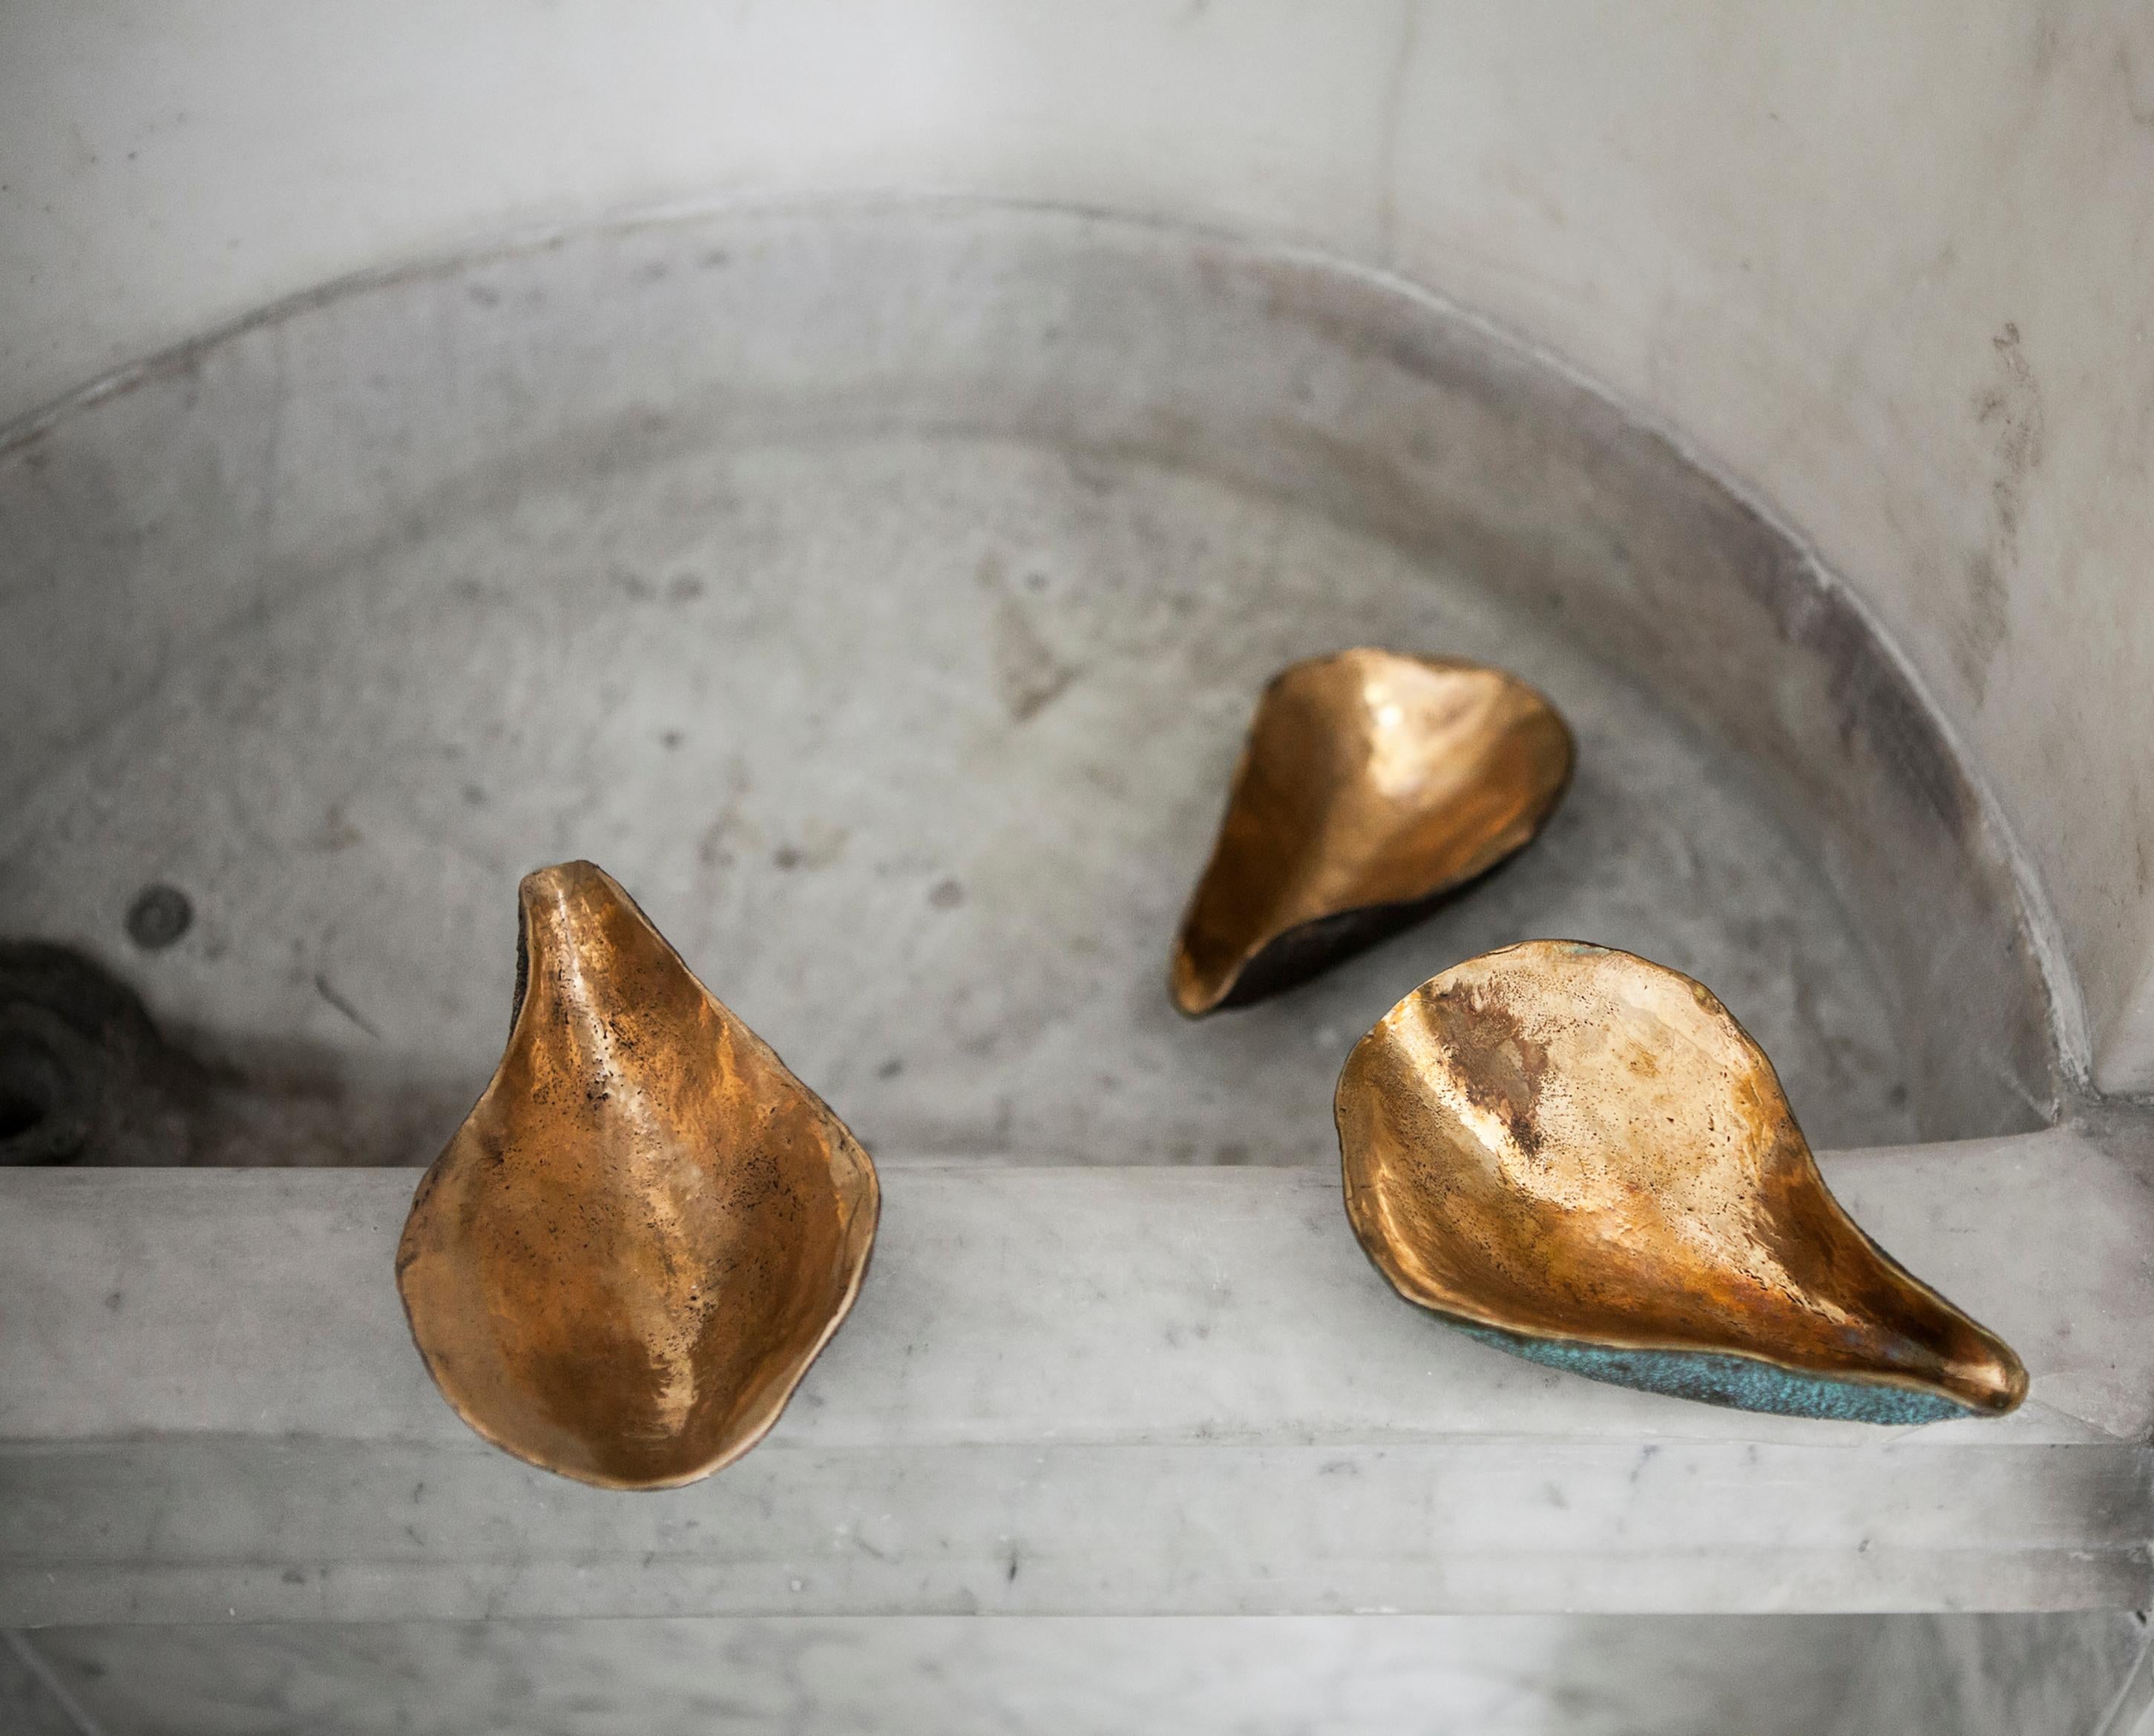 This solid bronze dish is an interior embellishment. 
The organic shape is sculpted by hand, richly textured on the outside and polished on the inside. Inspired by the feminine and evocative shapes of oyster shells, this home accessory will add a